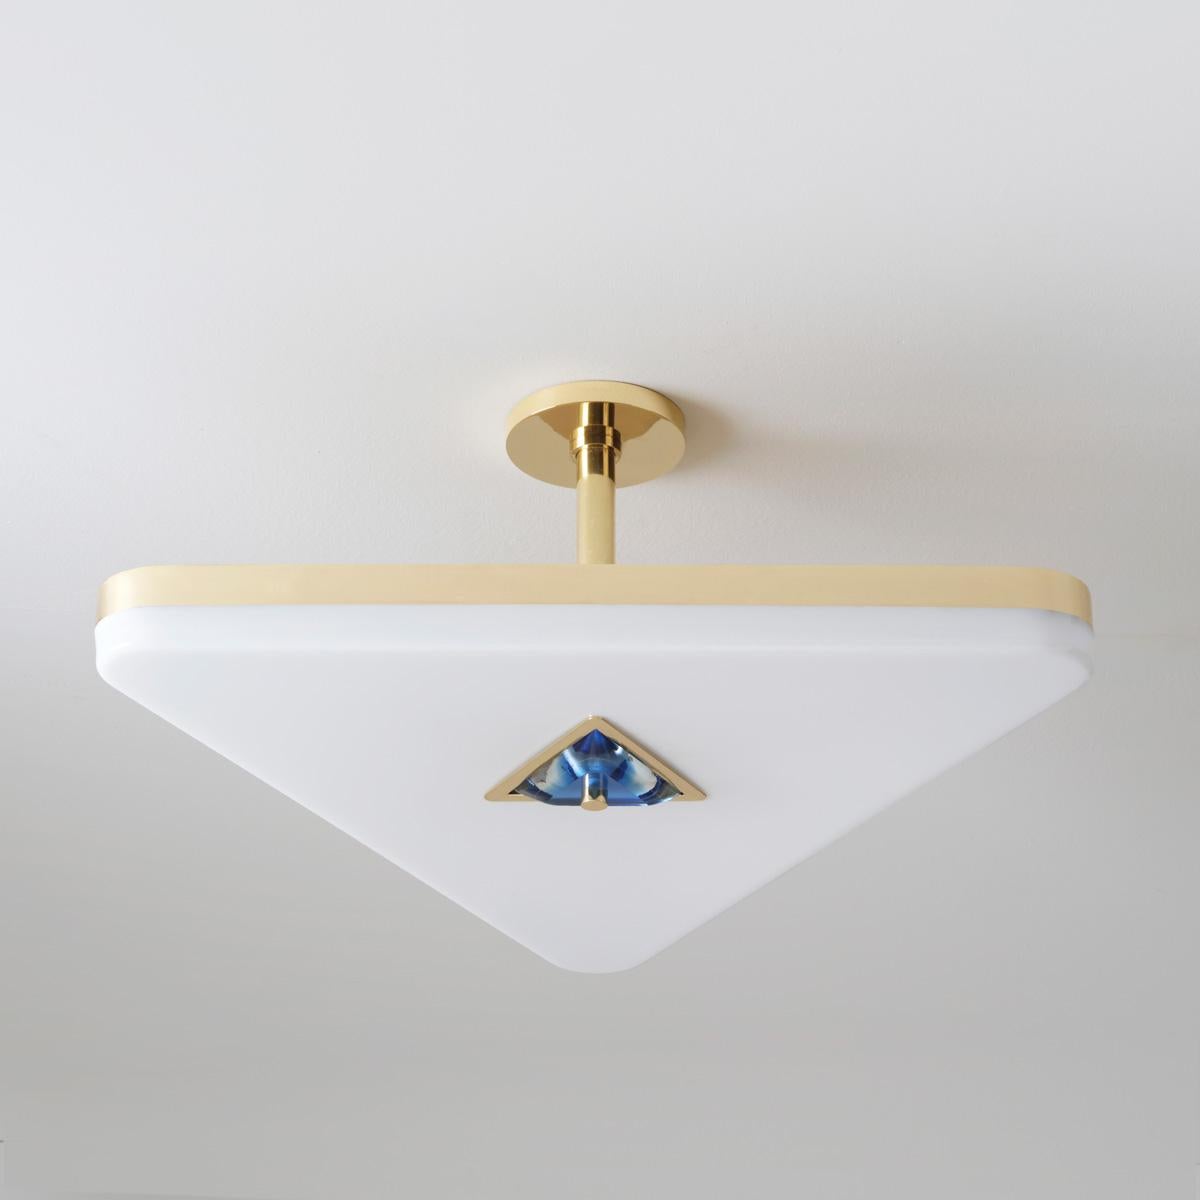 Iris Triangle Ceiling Light by Gaspare Asaro. Bronze Finish For Sale 1